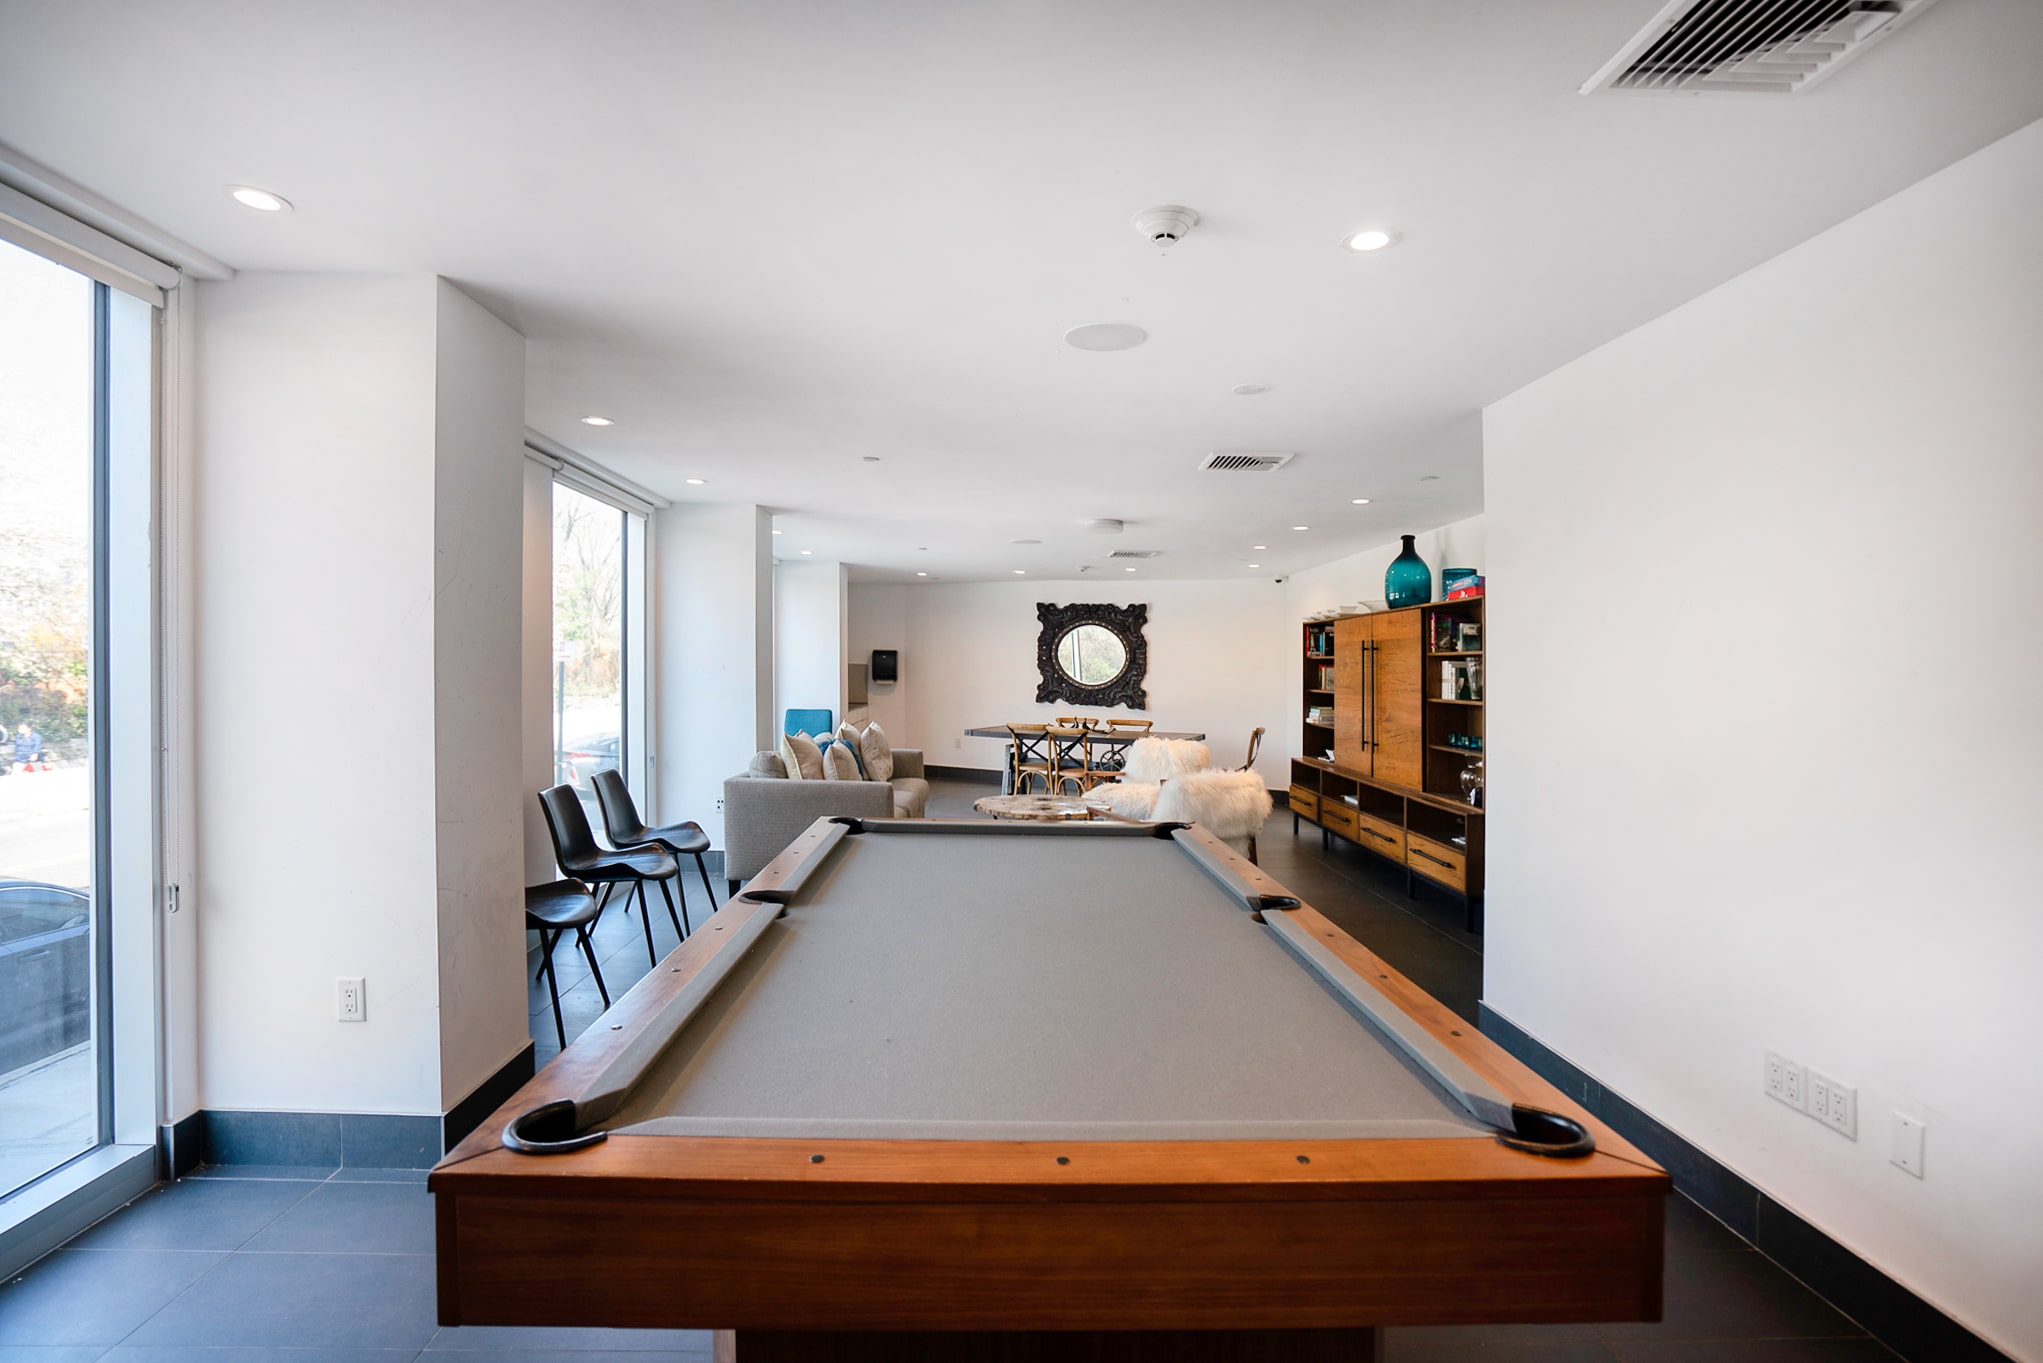 The game room we offer in the Vernon Tower